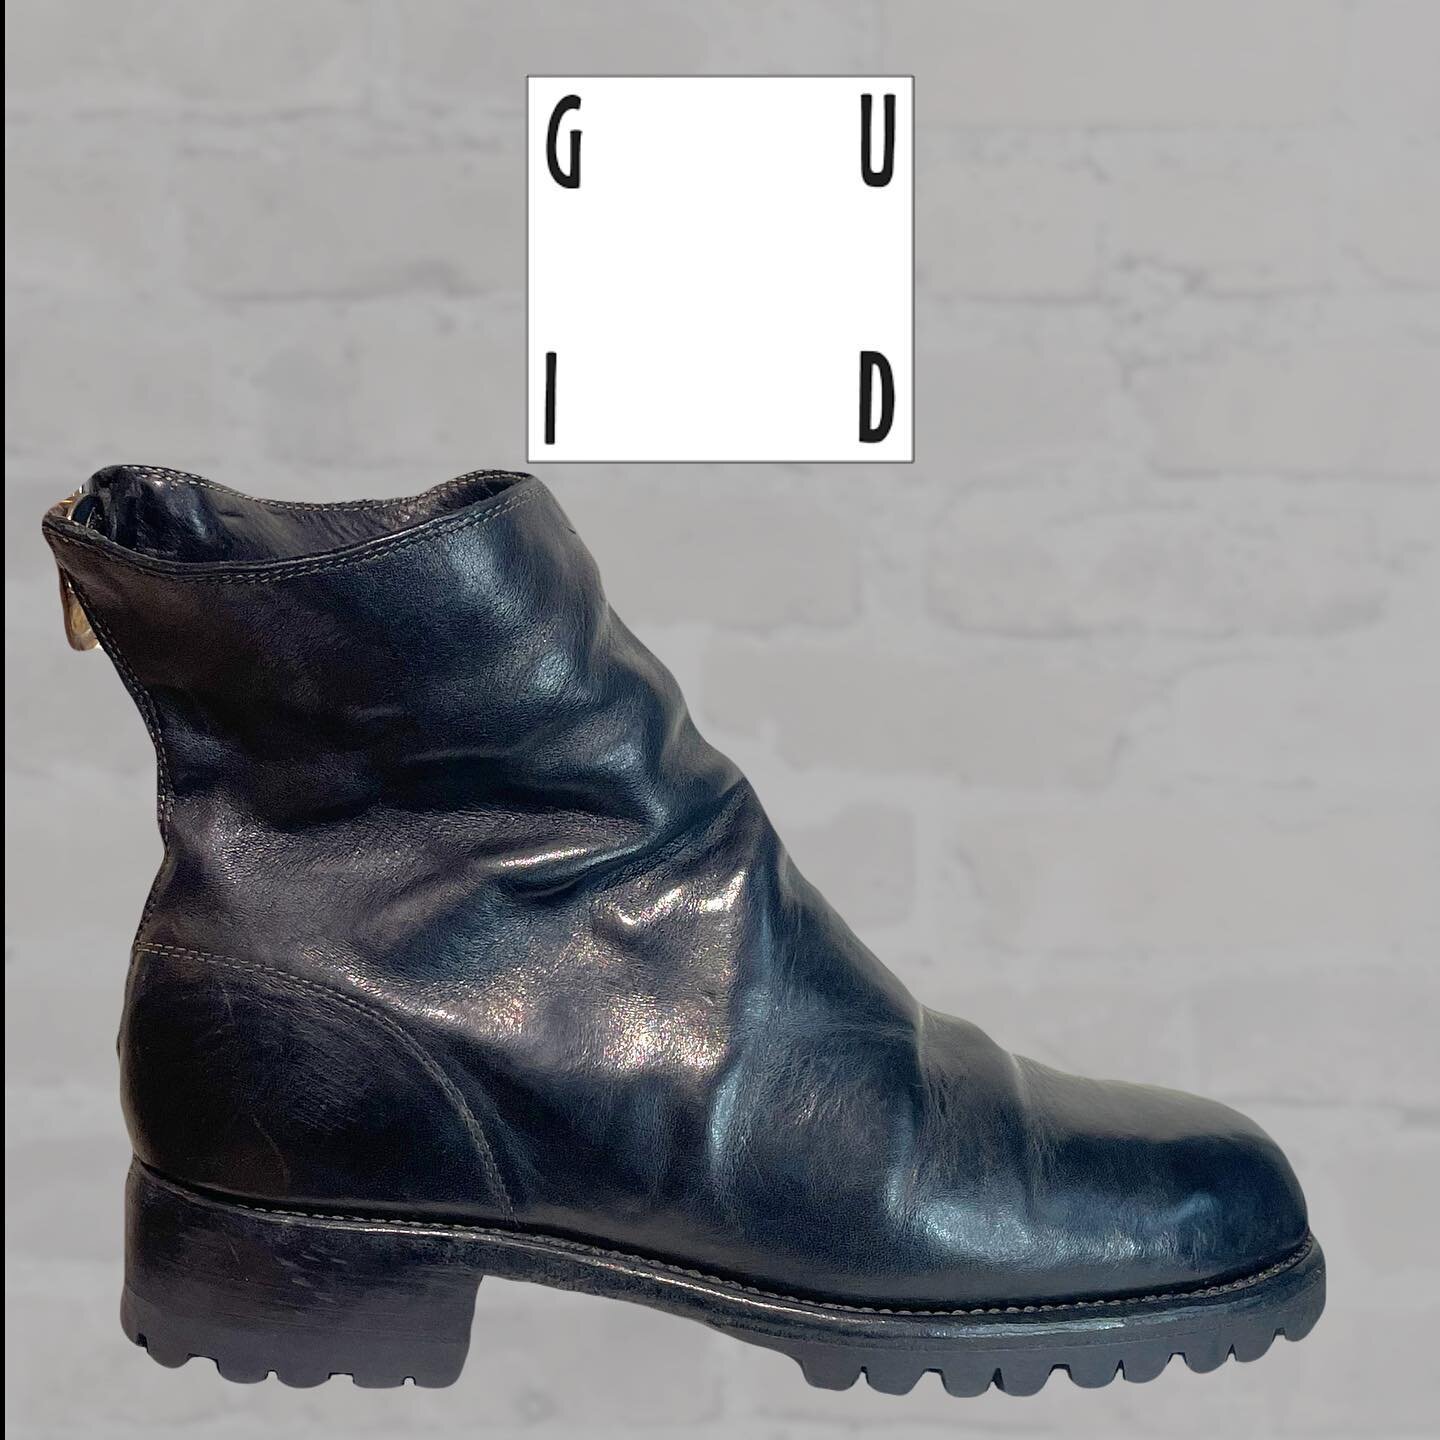 Guidi Black Leather 988 Back Zip Boots With Added Rubber Sole and Heel Taps Sz 11 
#guidi